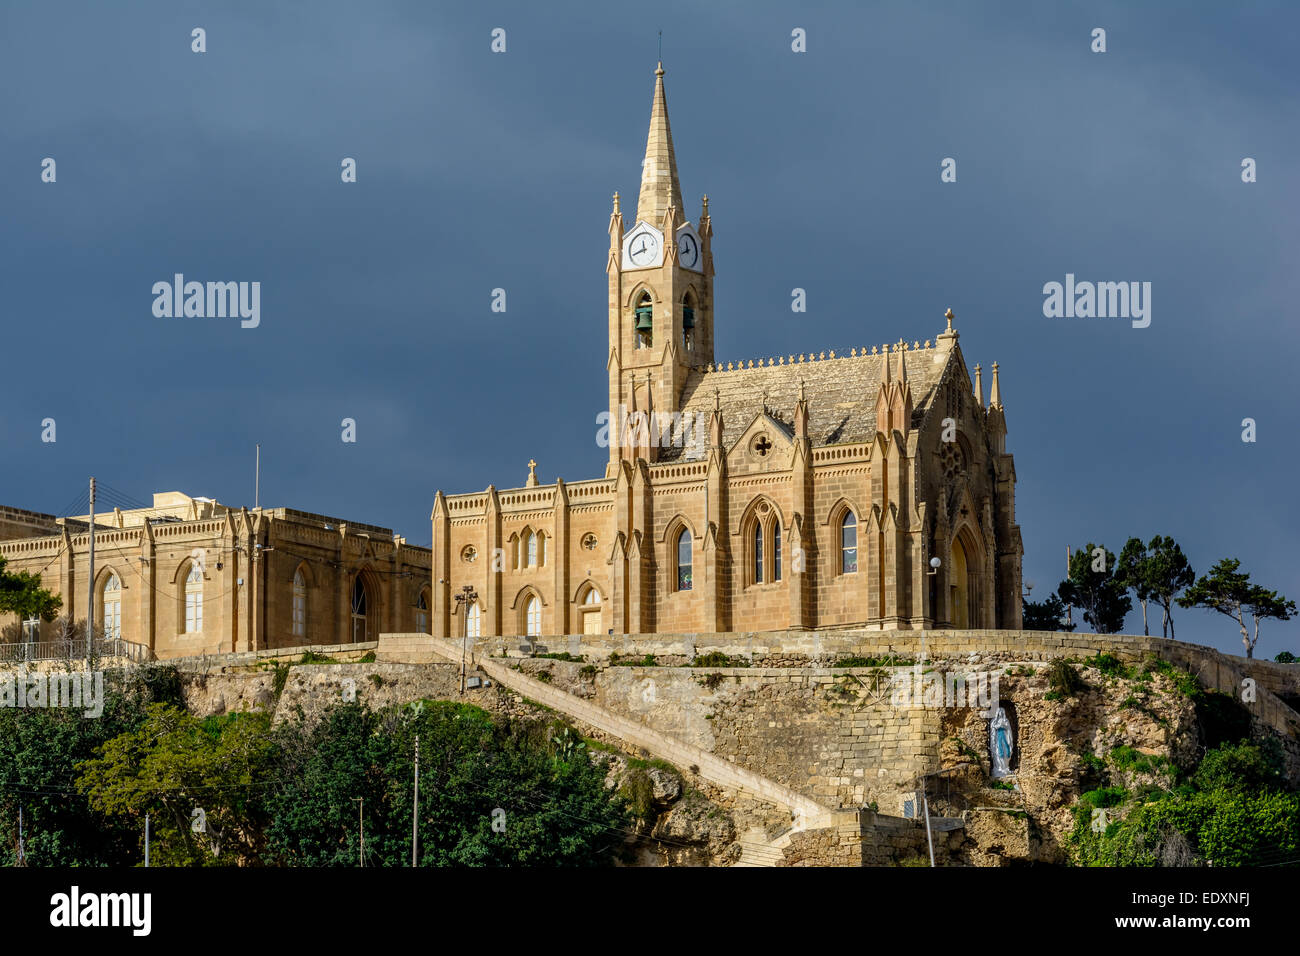 Lourdes Church, a neo-gothic monument built in 1888 on the coastal village of Mgarr on the island of Gozo, Malta Stock Photo